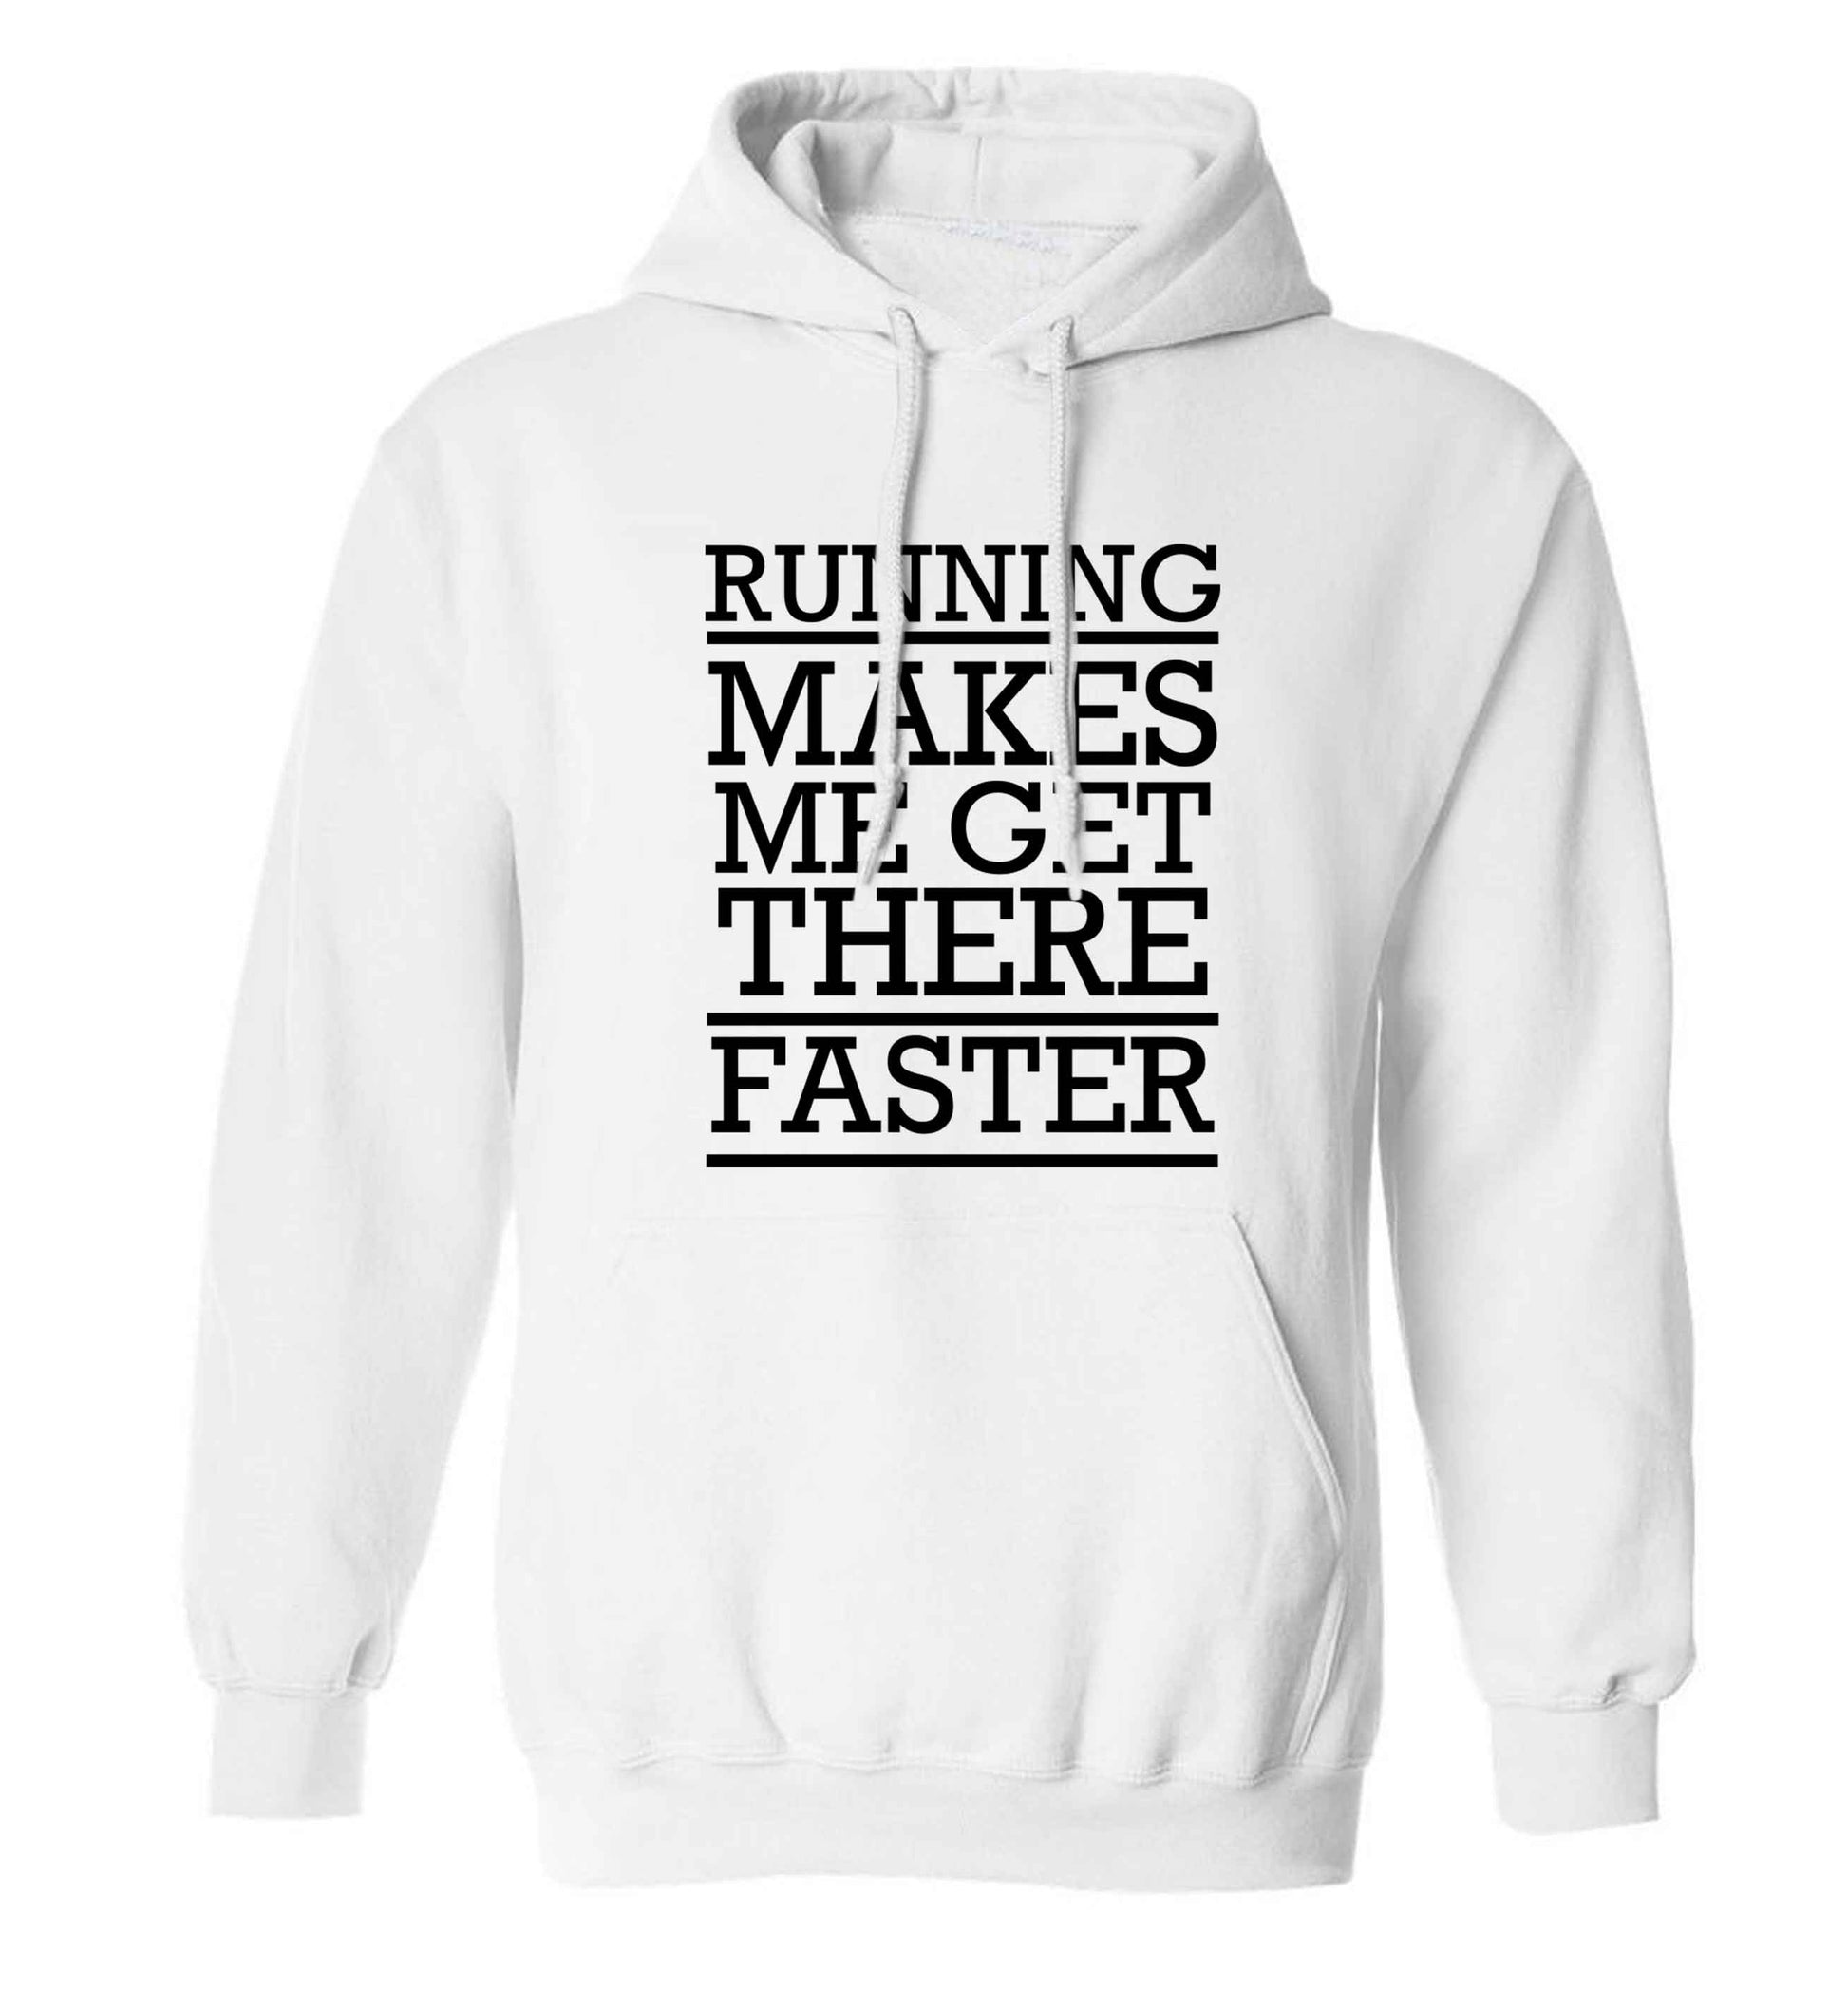 Running makes me get there faster adults unisex white hoodie 2XL